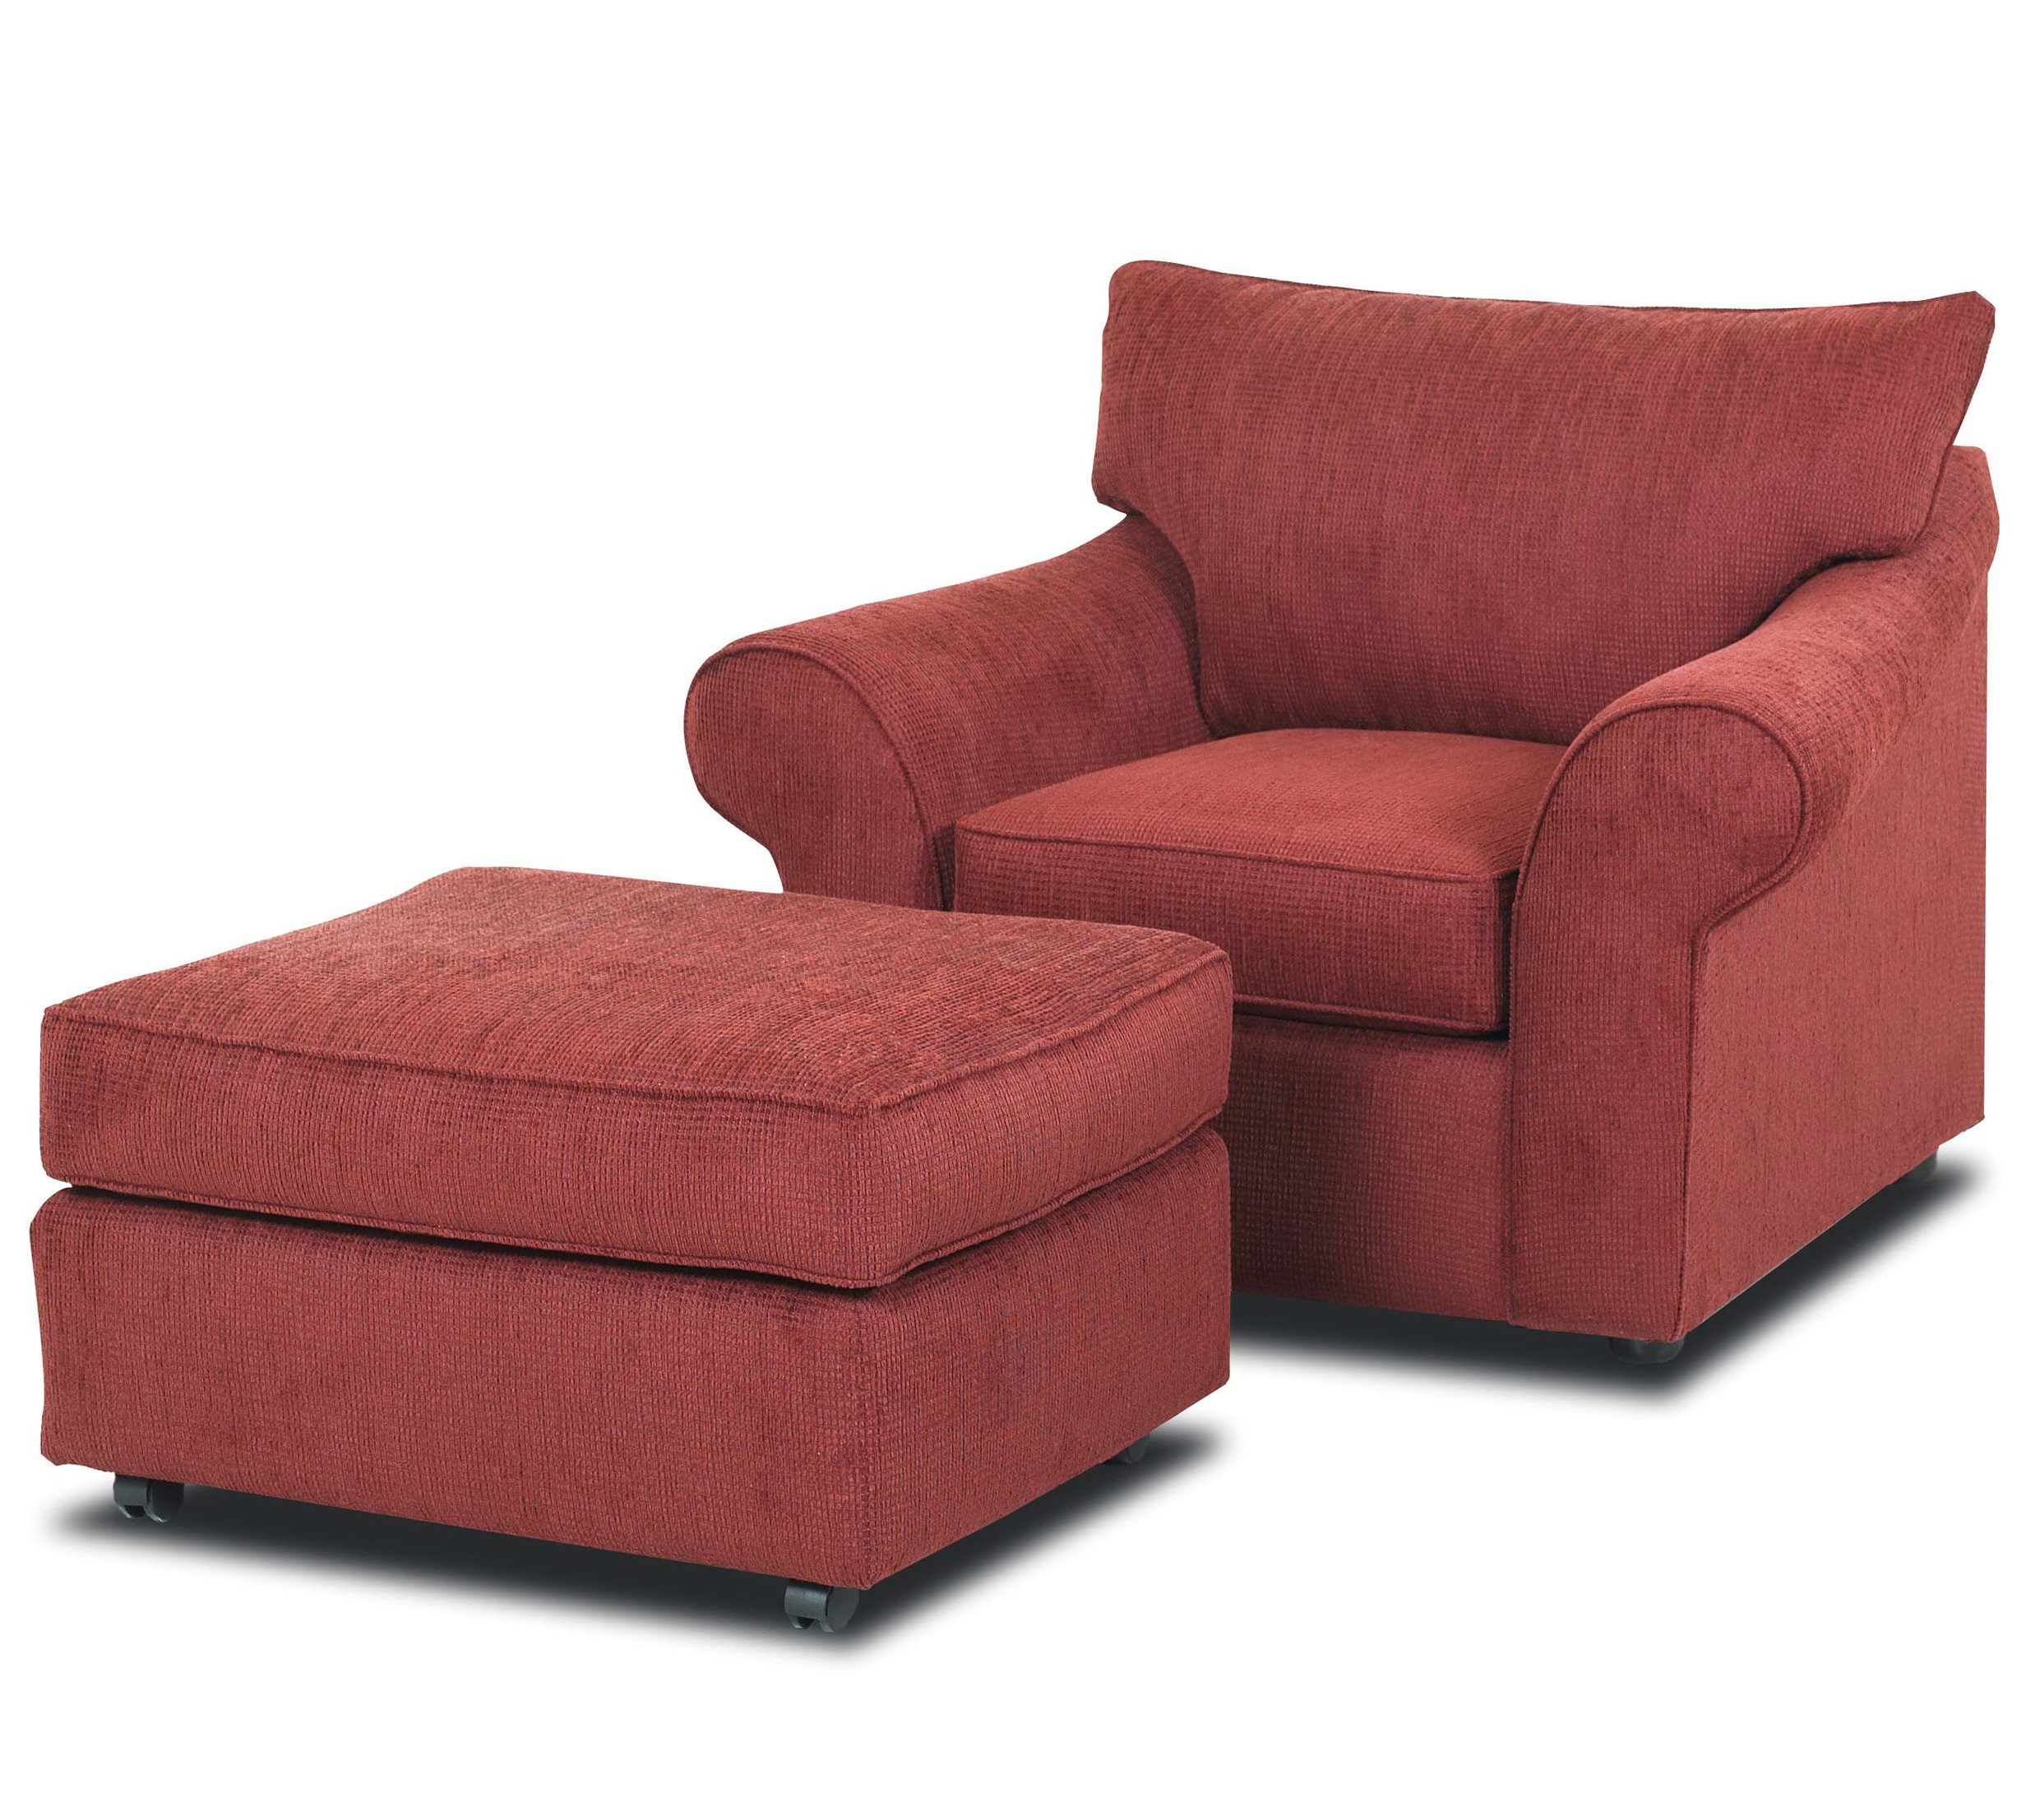 Chair And Ottoman Sets Cheap 